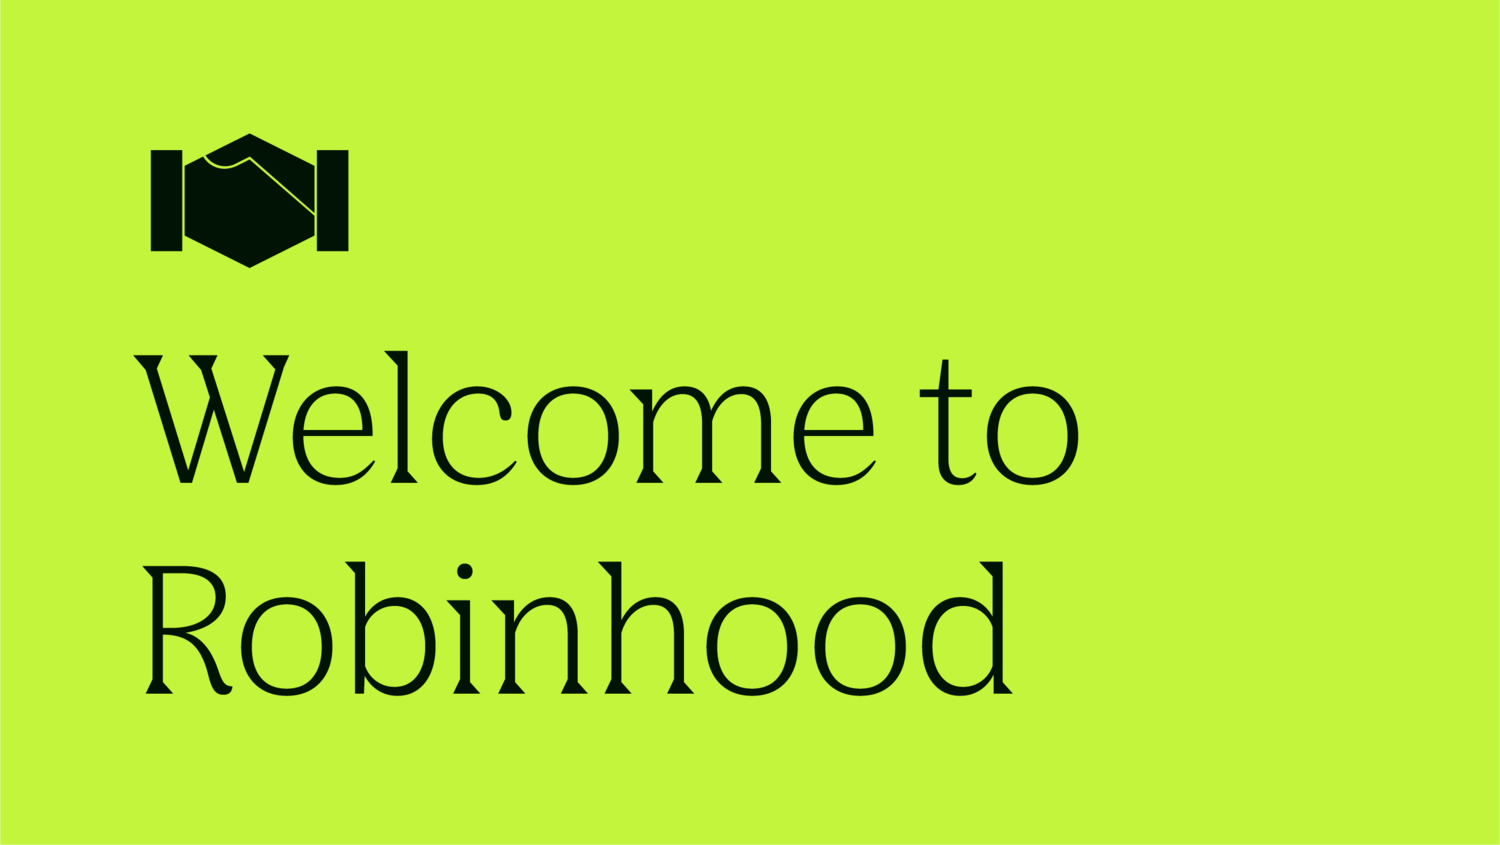 Robinhood Markets Welcomes Steve Quirk as Chief Brokerage Officer